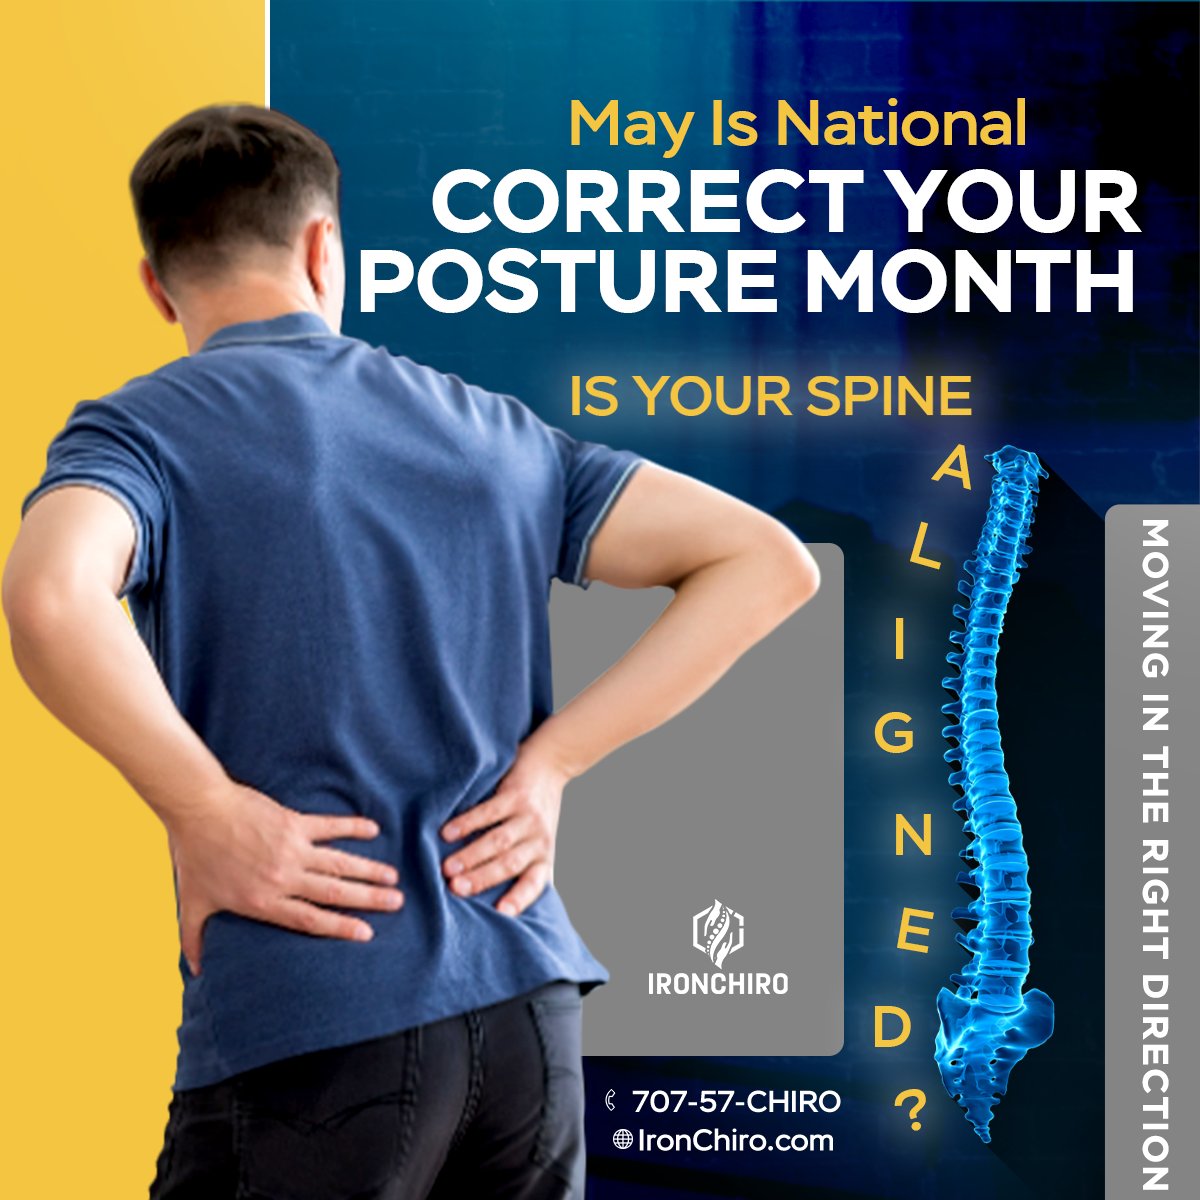 May is National Correct Your Posture Month, and it's the perfect time to straighten things up! 
Stand tall with IronChiro! 

#CorrectYourPostureMonth | #IronChiro | #StandTall | #BackHealth | #ChiropracticCare